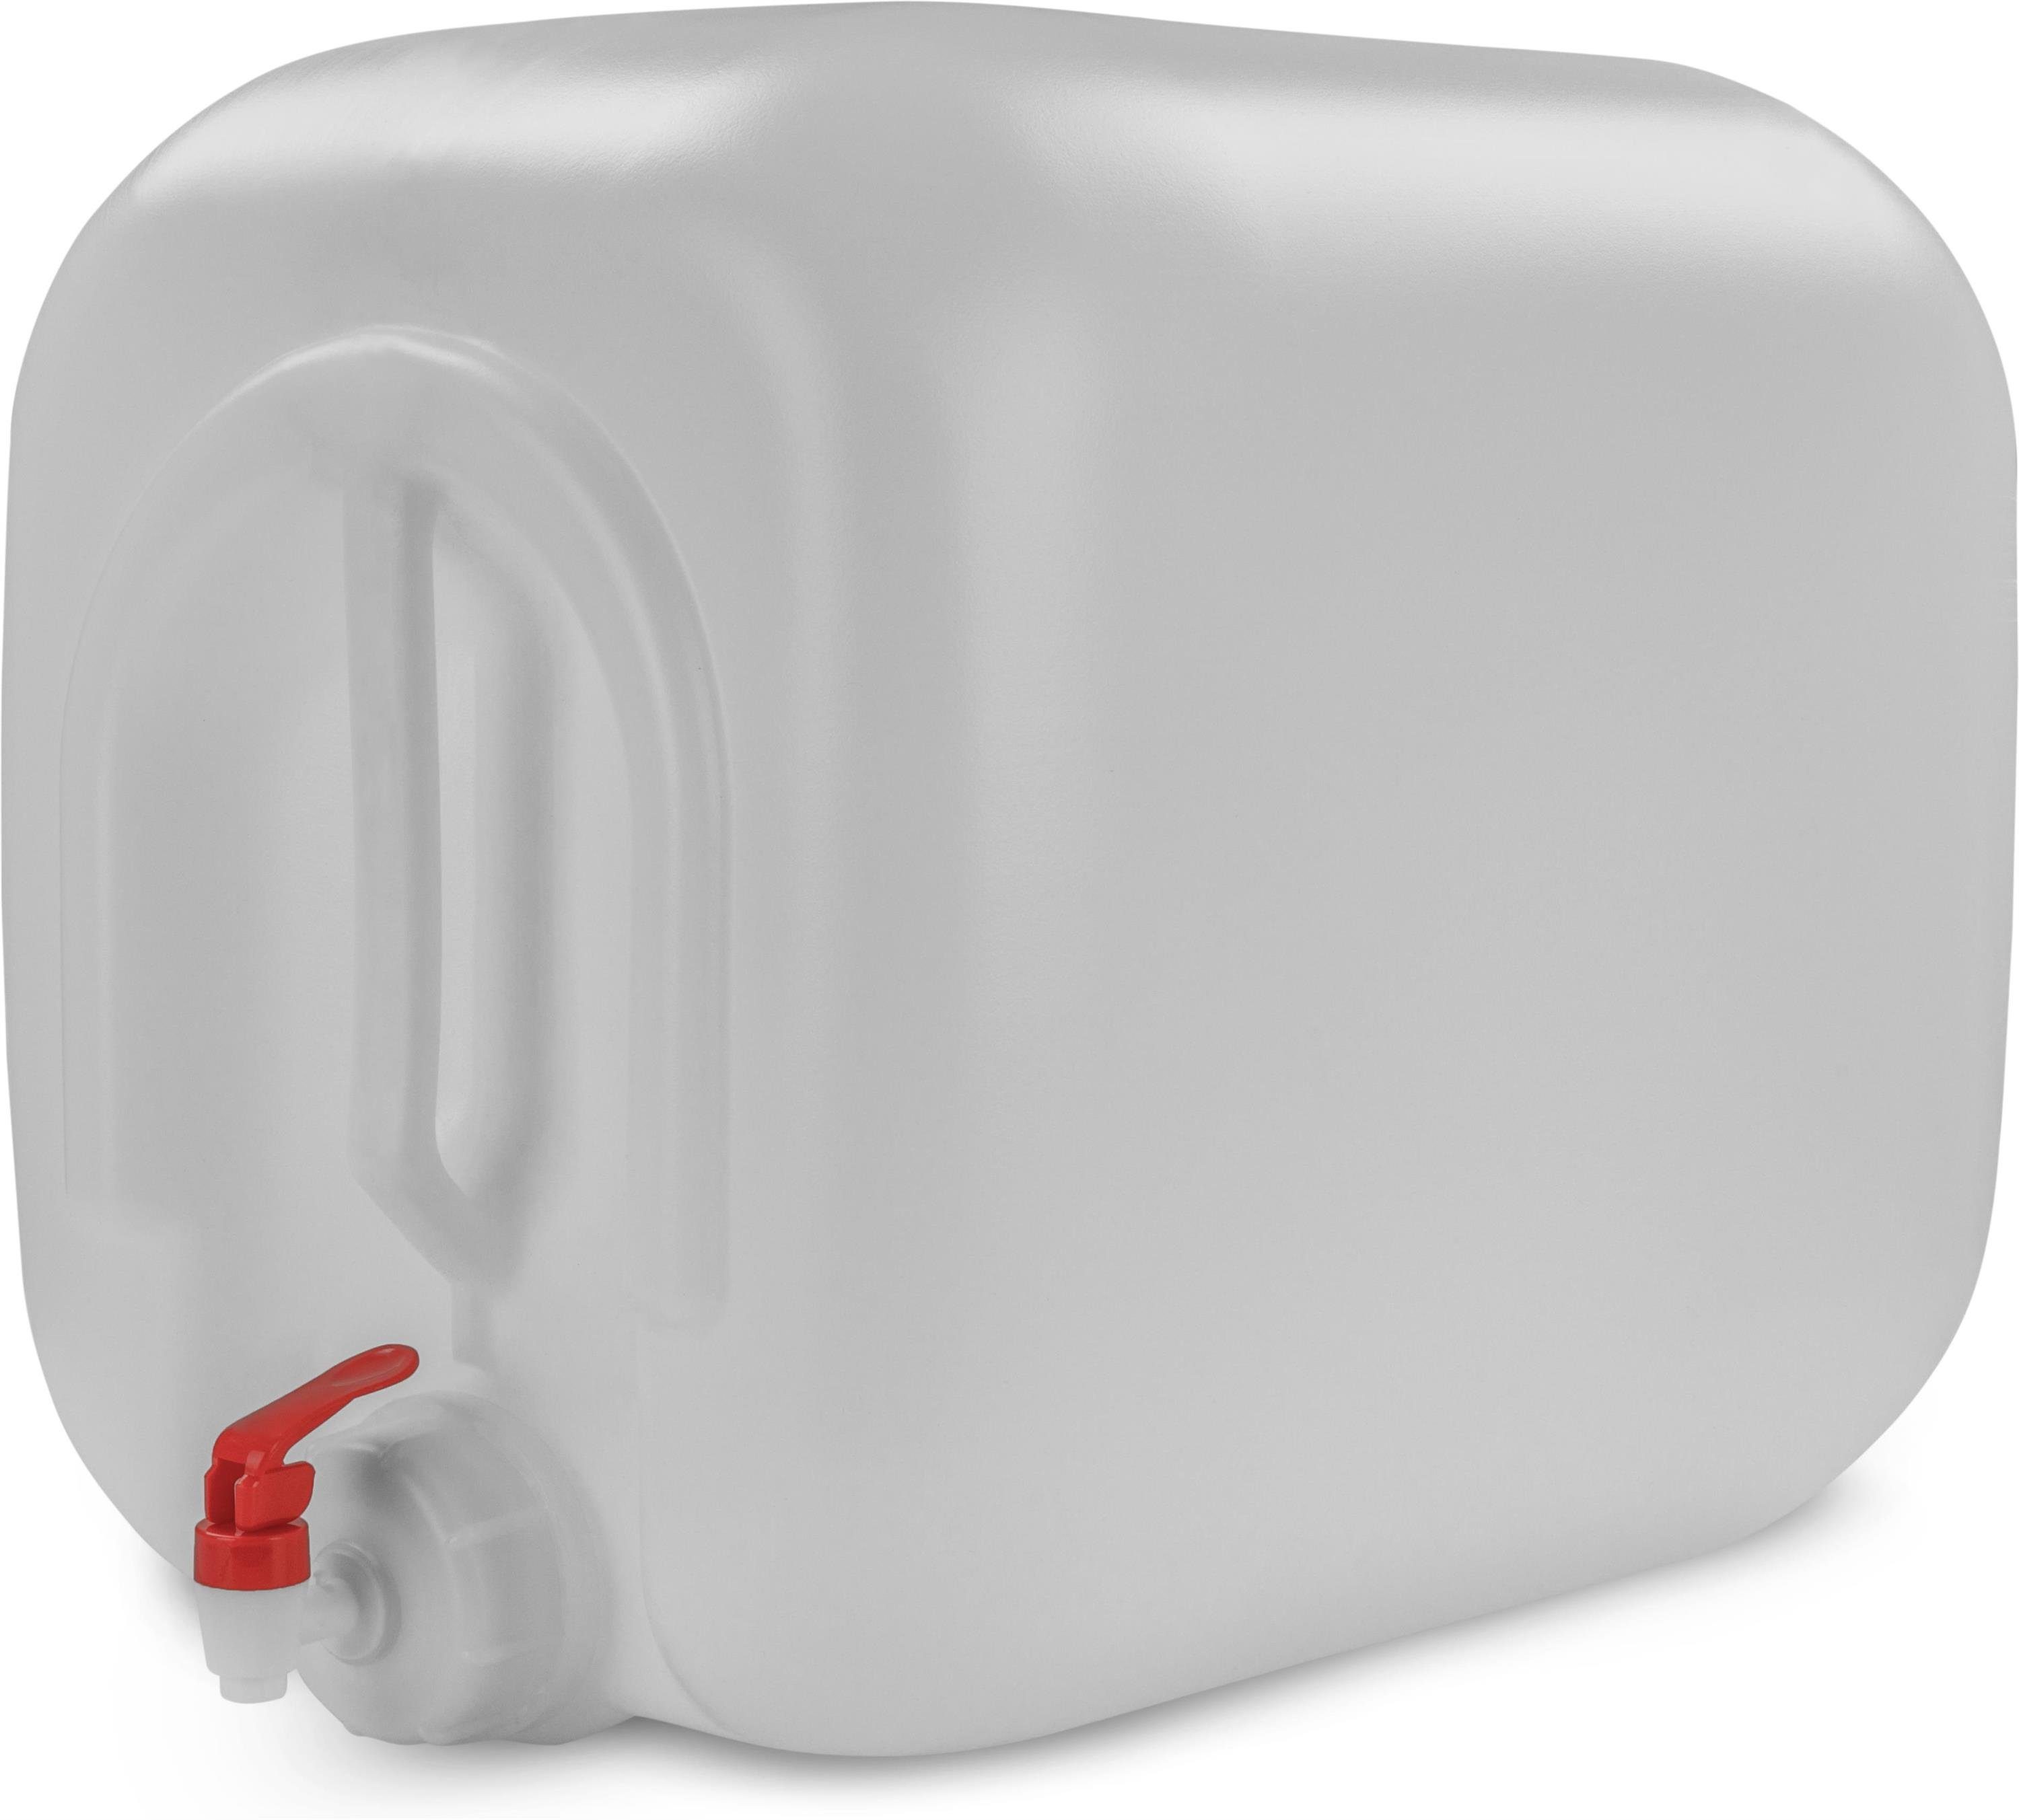 Campingkanister mit St), Carry Kanister Lebensmittelecht Wasserkanister (1 Liter Trinkwasserkanister 30 Hahn Wasserbehälter Outdoorkanister normani